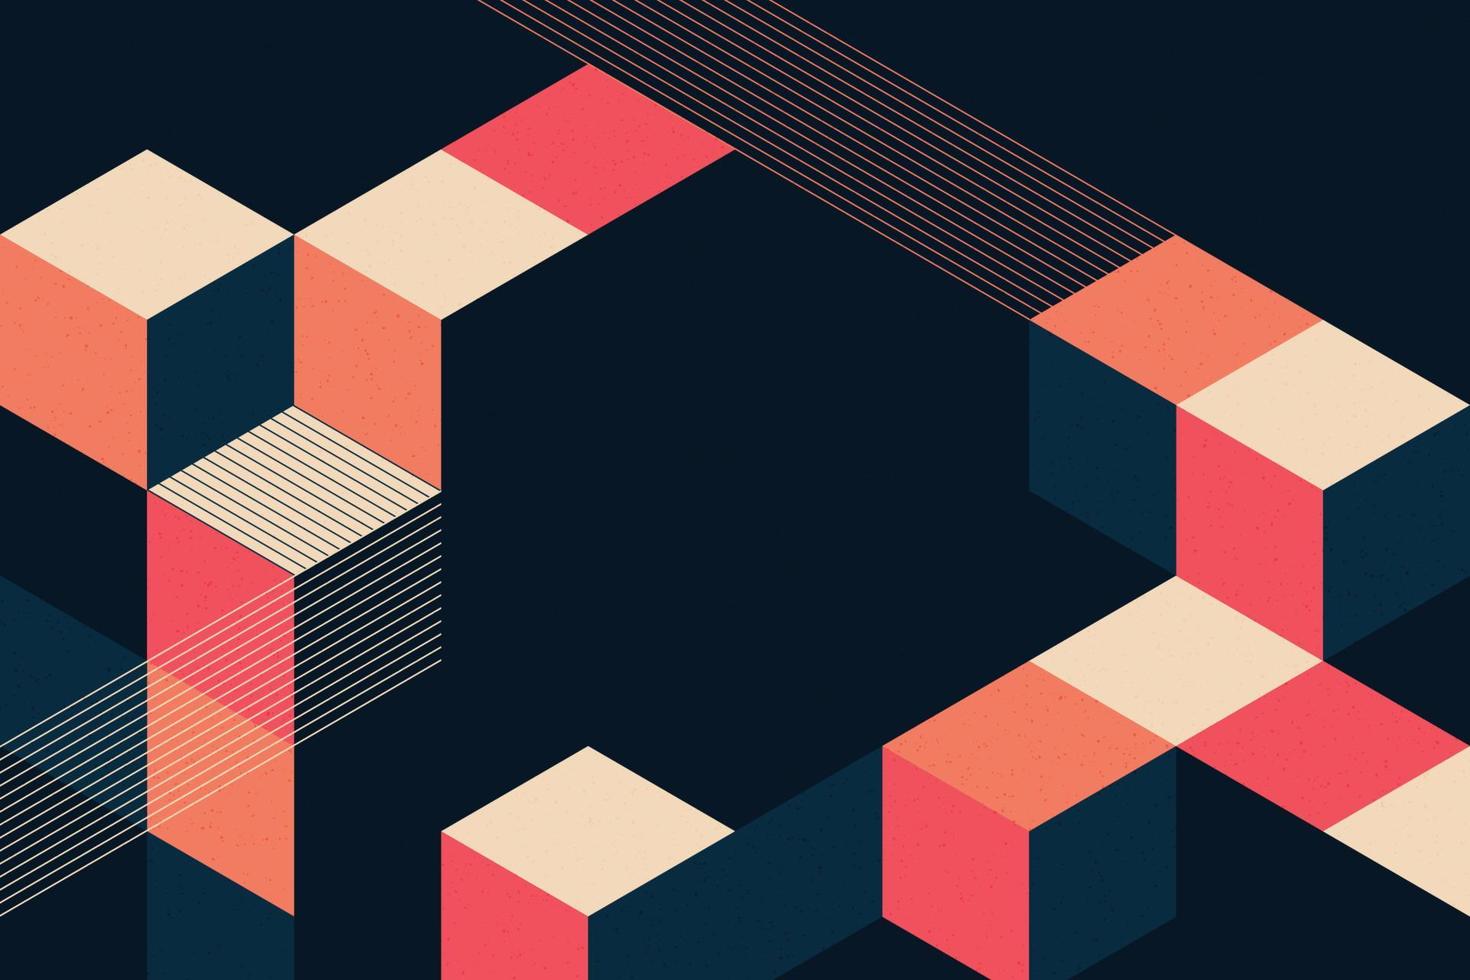 Abstract isometric geometric cube shapes composition on black background vector